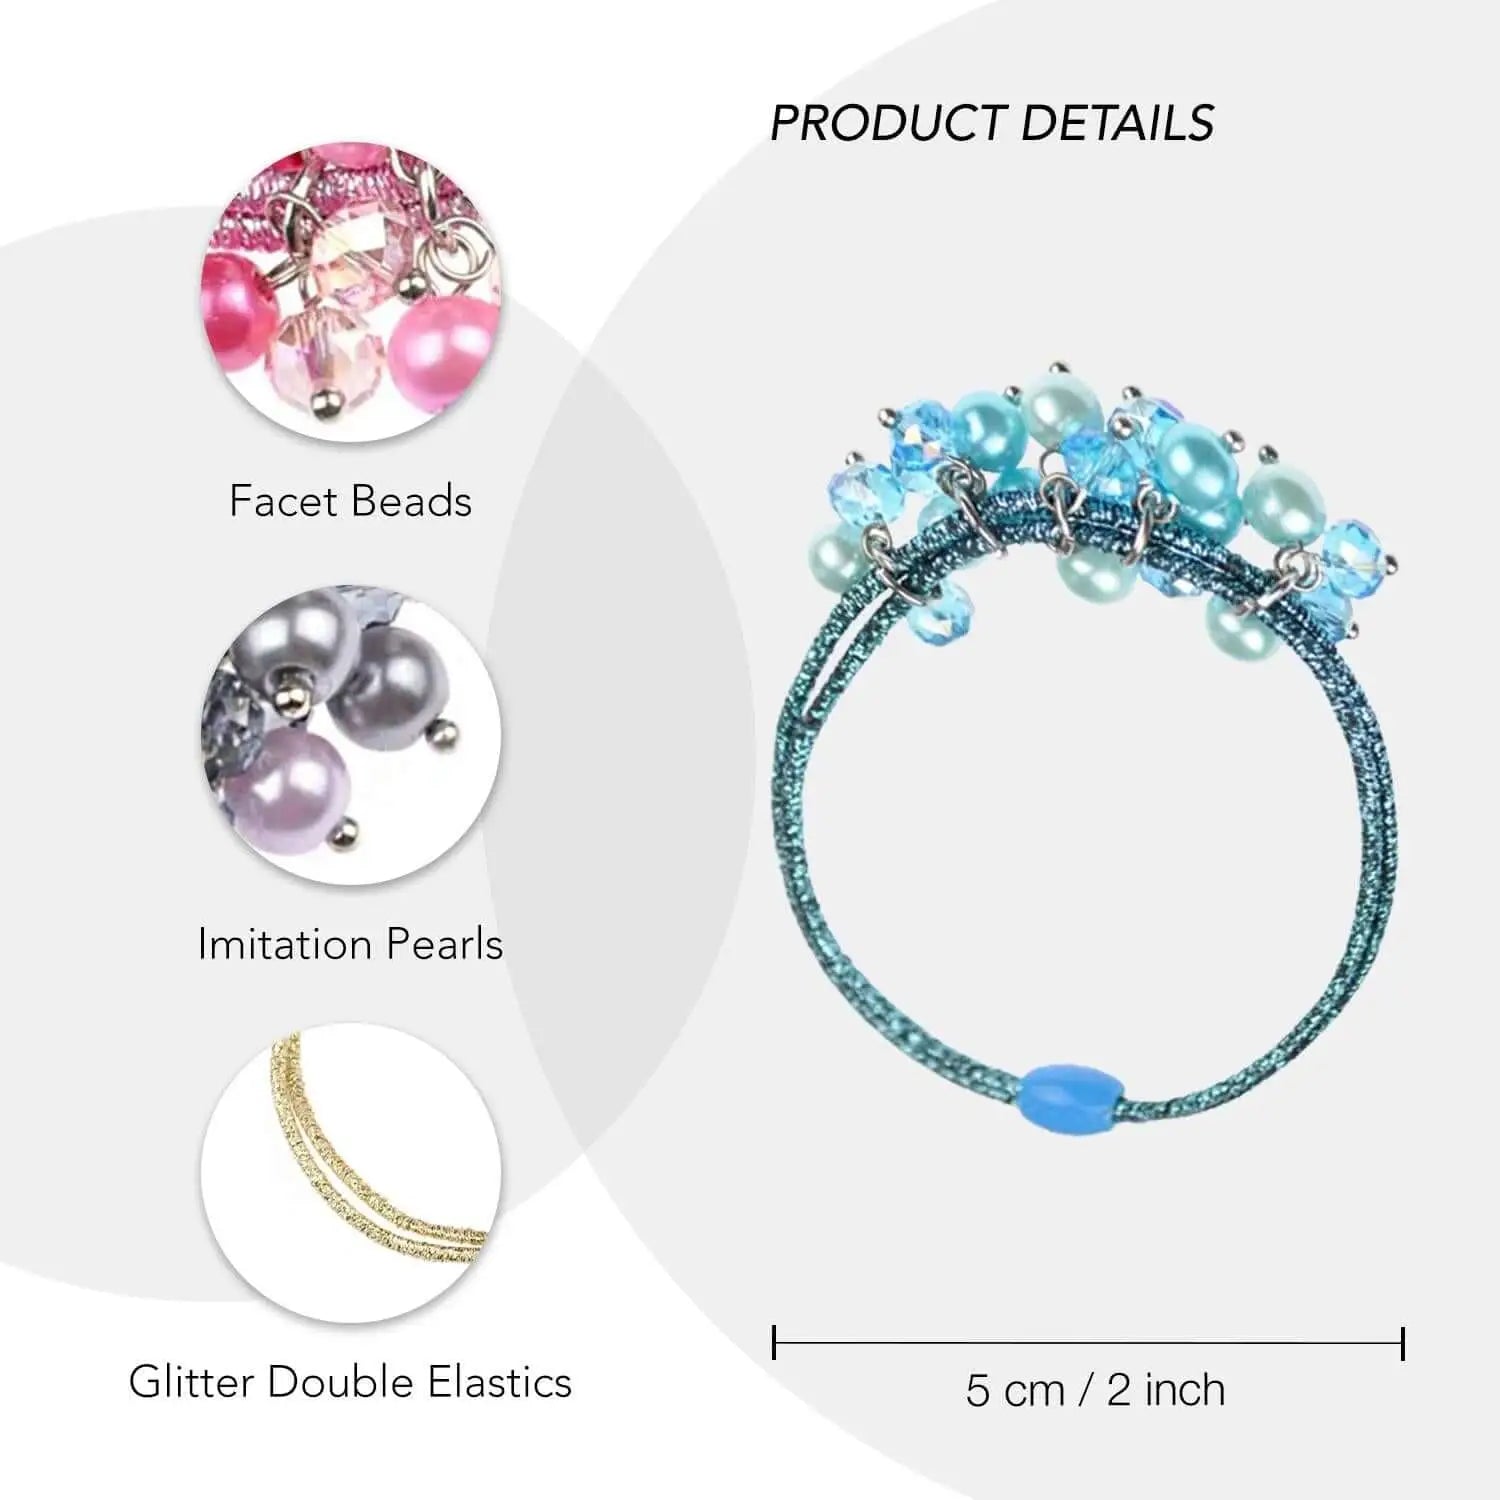 Floral and beaded metallic elastic hair bands product display.